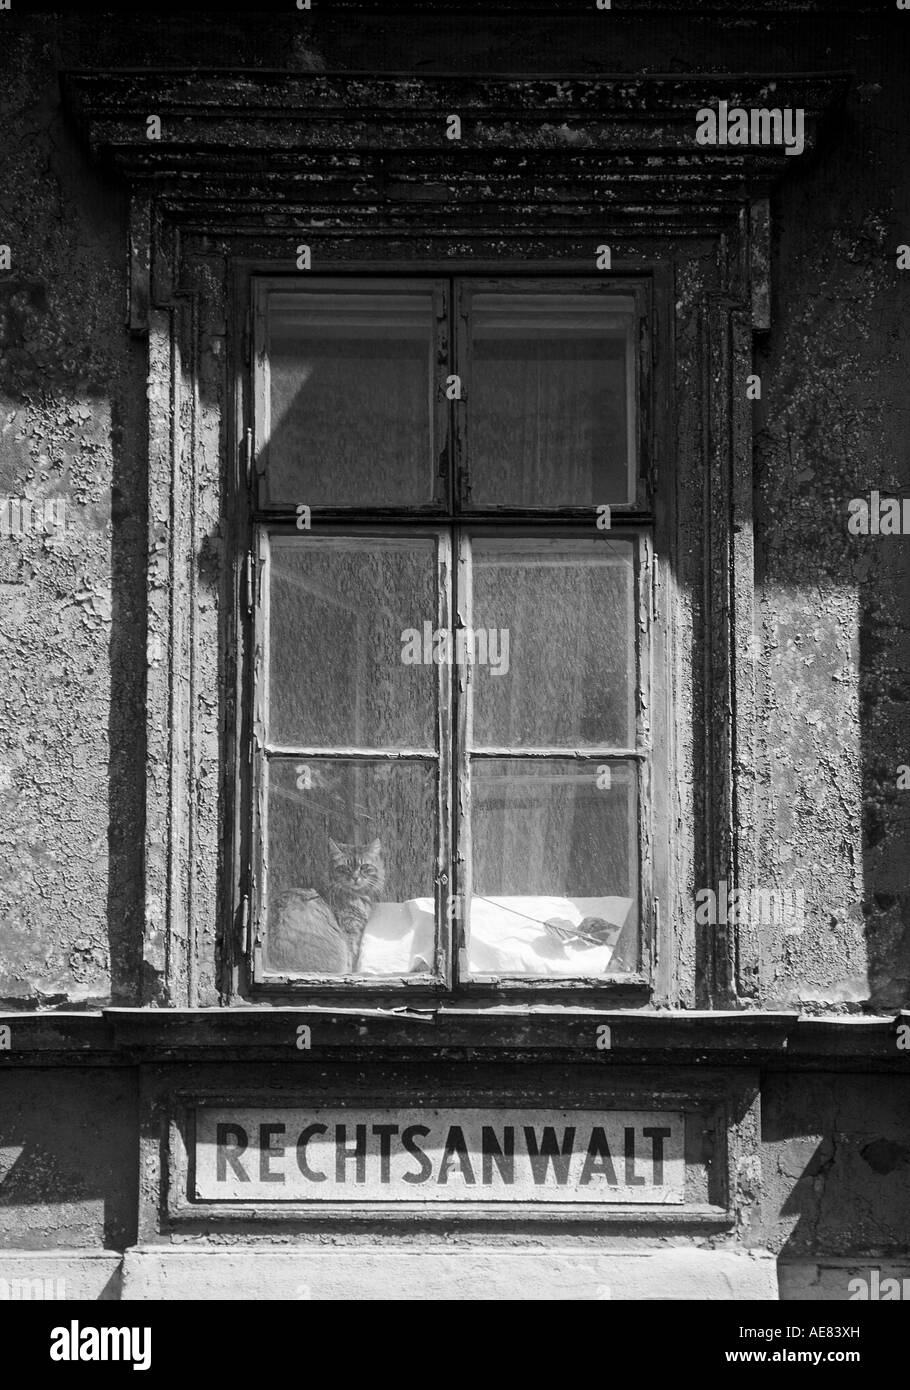 A cat is looking from the window of an old house. Below the window is a sign placed that says 'Rechtsanwalt' (attorney). Stock Photo